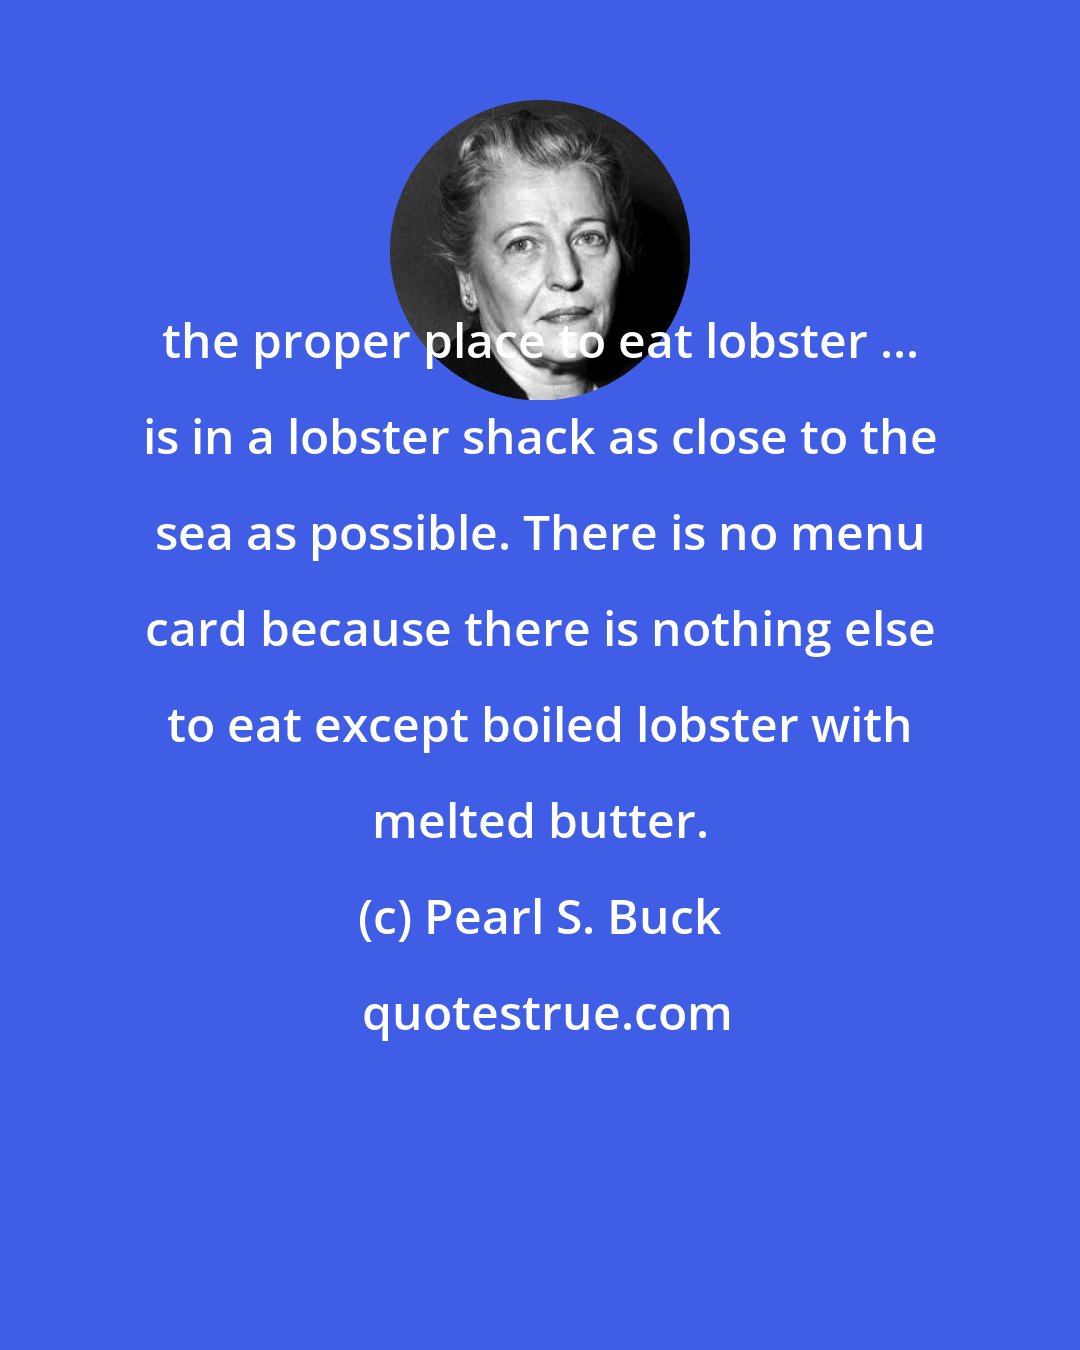 Pearl S. Buck: the proper place to eat lobster ... is in a lobster shack as close to the sea as possible. There is no menu card because there is nothing else to eat except boiled lobster with melted butter.